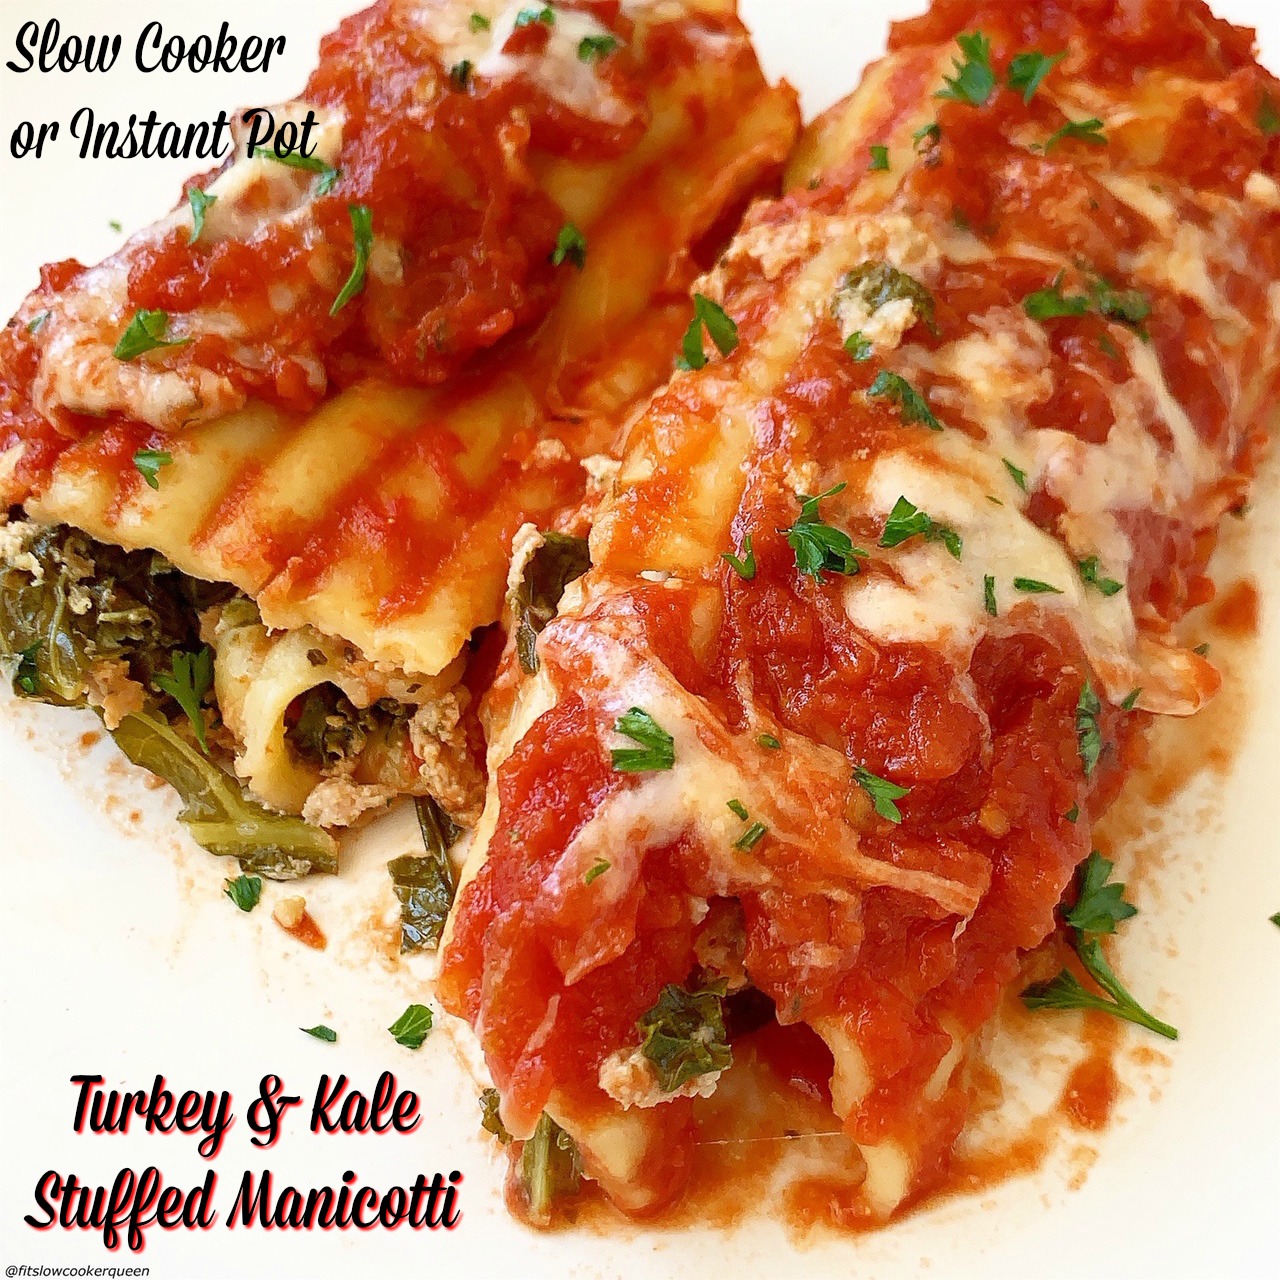 cover pic for slow cooker or instant pot turkey & kale stuffed manicotti